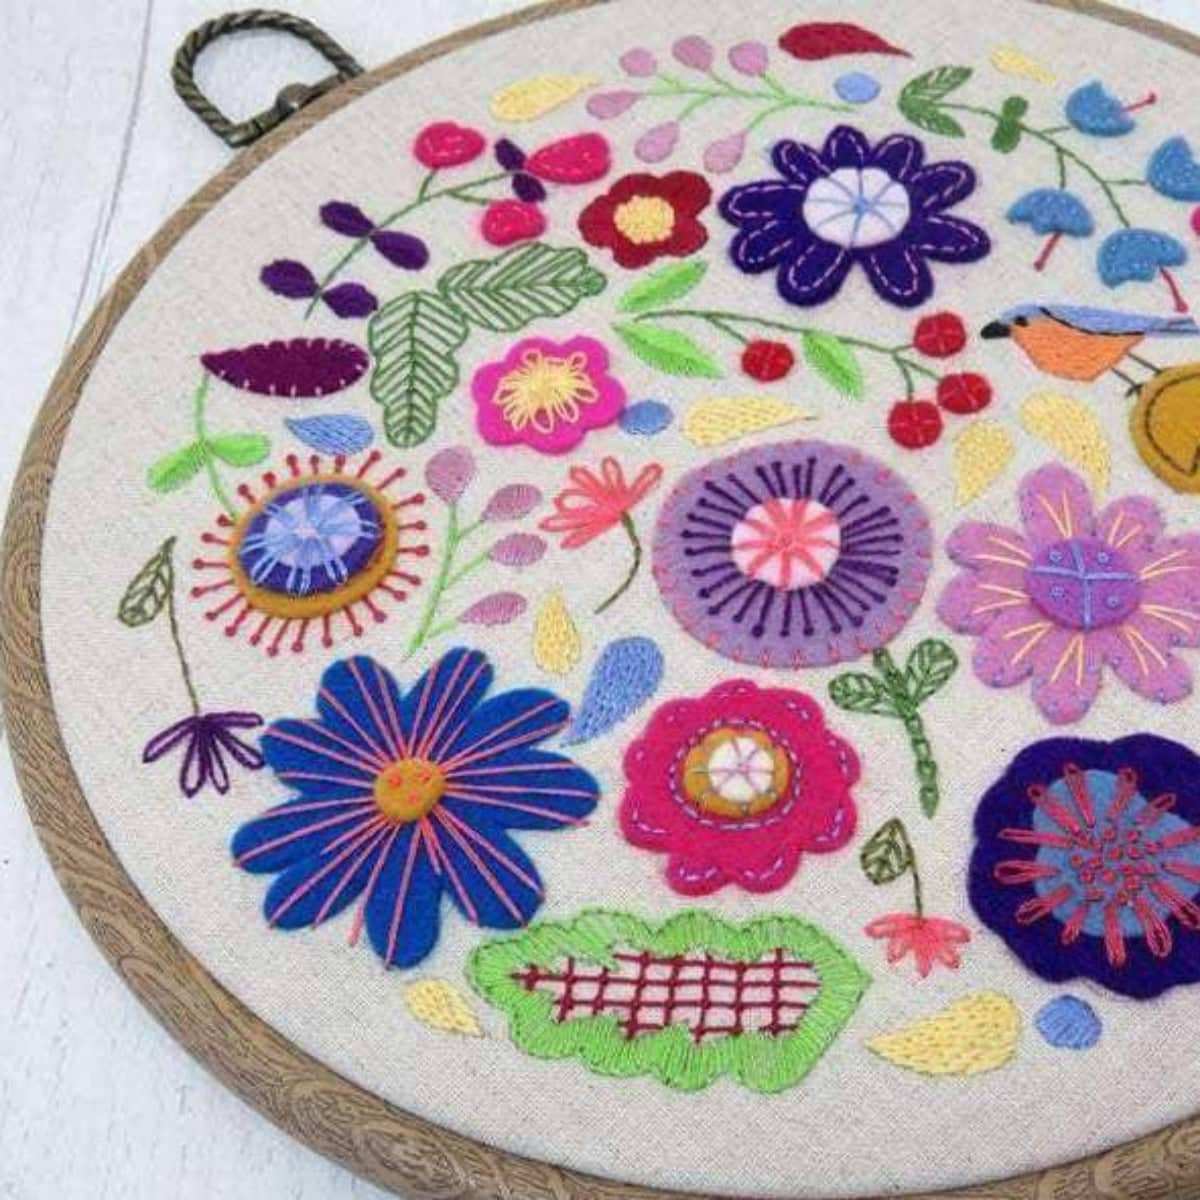 Enchanted Garden, Hand Embroidery Pattern , PDF Download , StitchDoodles , Embroidery, embroidery hoop, embroidery hoop kit, embroidery kits for adults, embroidery kits for beginners, embroidery pattern, flower embroidery, hand embroidery fabric, hand embroidery seat frame, modern embroidery kits, nurge embroidery hoop, Printed Pattern, unique embroidery kits , StitchDoodles , shop.stitchdoodles.com